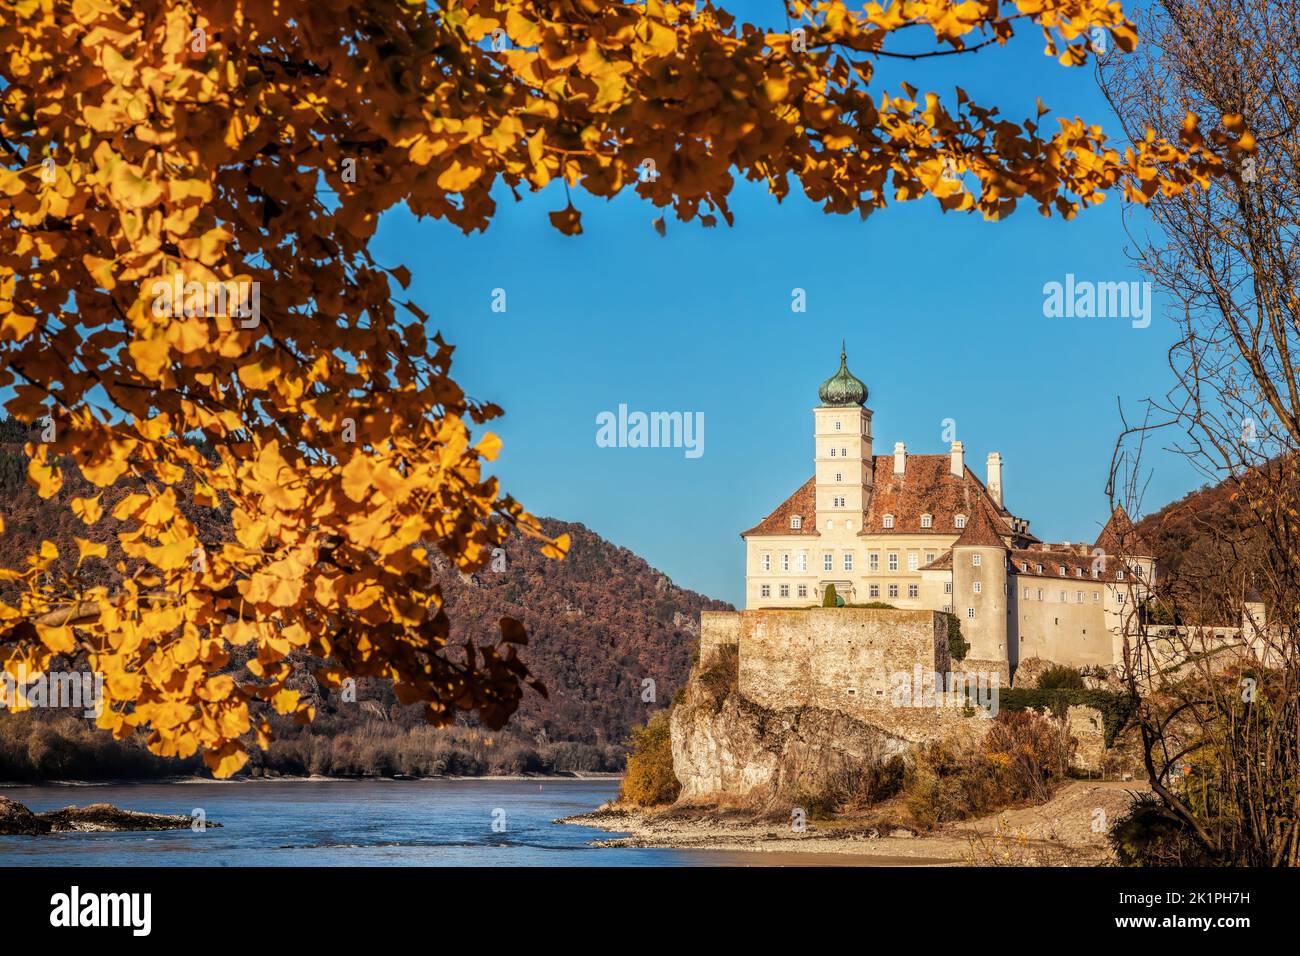 The medieval Schonbuhel castle, built on a rock over Danube river during autumn in Wachau valley, UNESCO, Austria Stock Photo